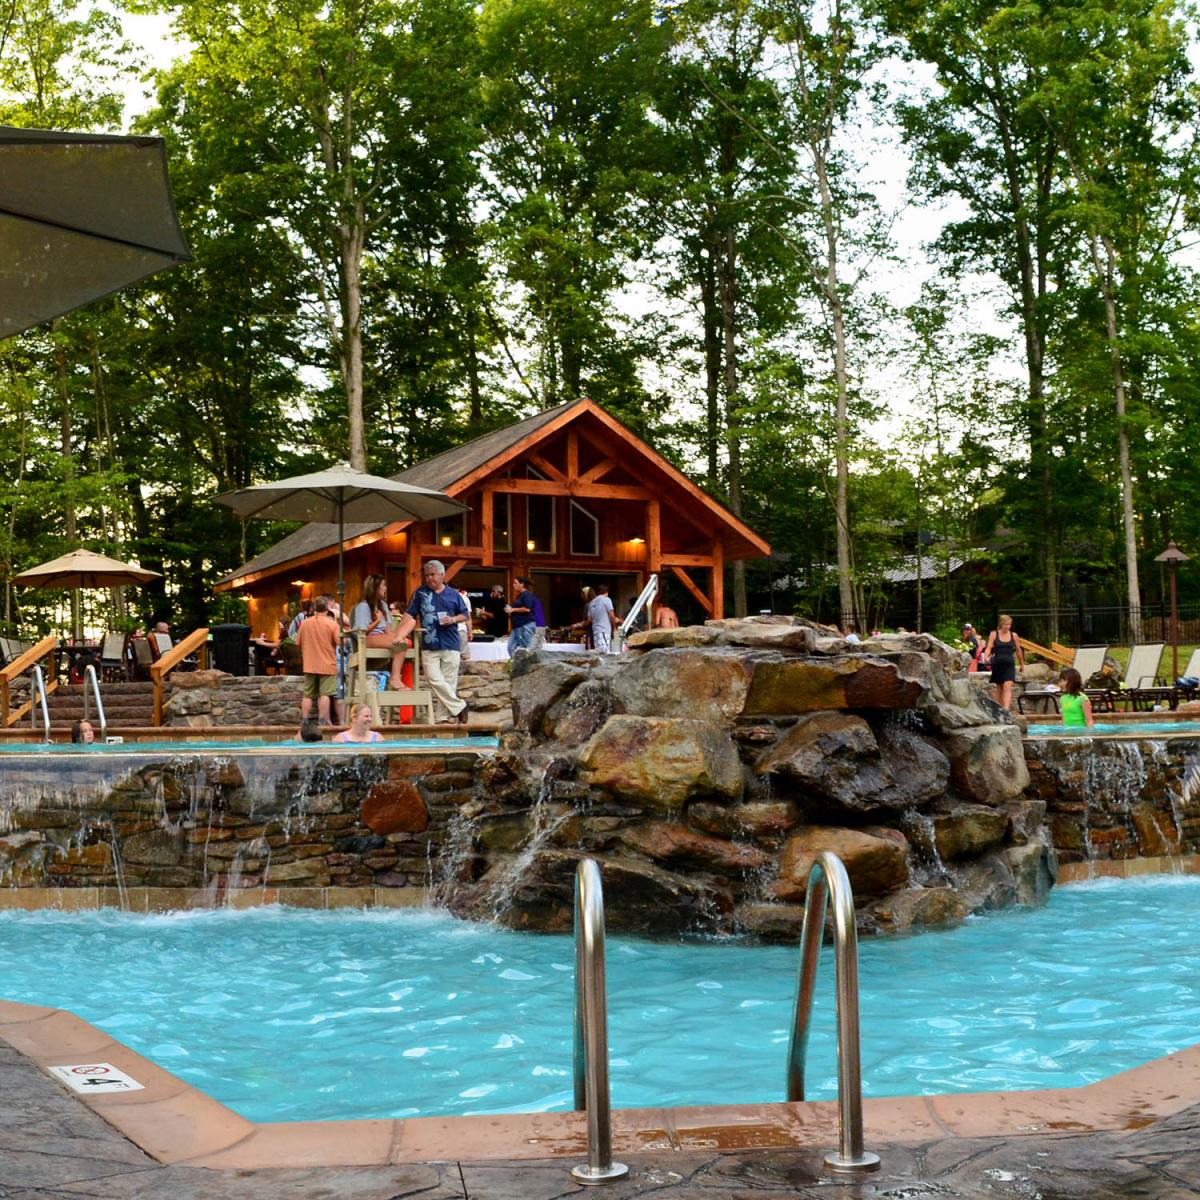 The pool at Adventures on the Gorge